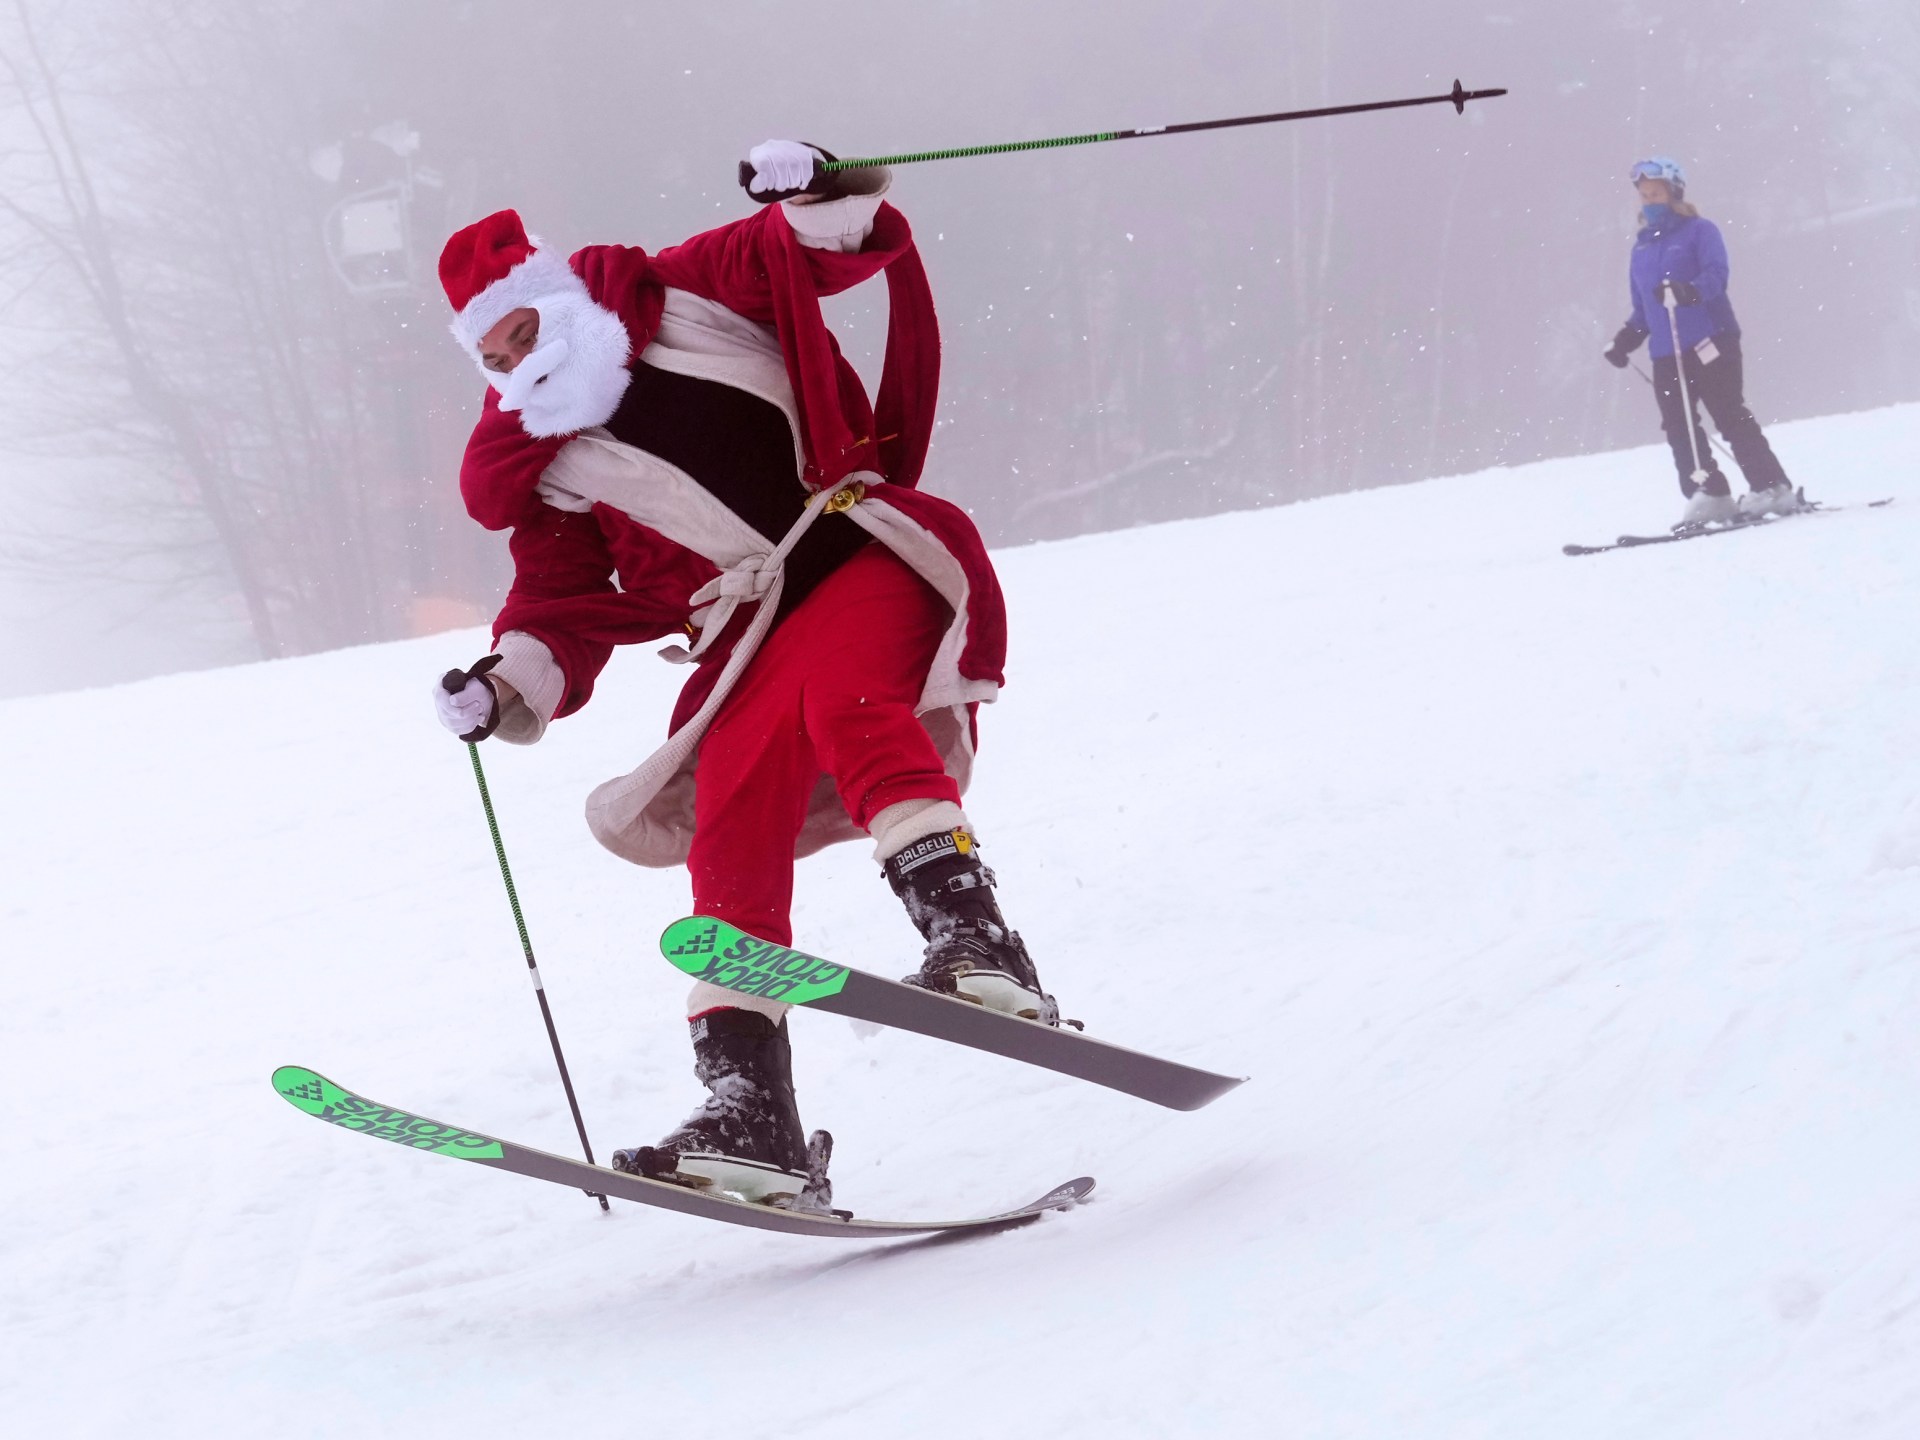 When Skiing Santas hit the slopes in Maine, US to kickoff holiday season | In Pictures #Skiing #Santas #hit #slopes #Maine #kickoff #holiday #season #Pictures